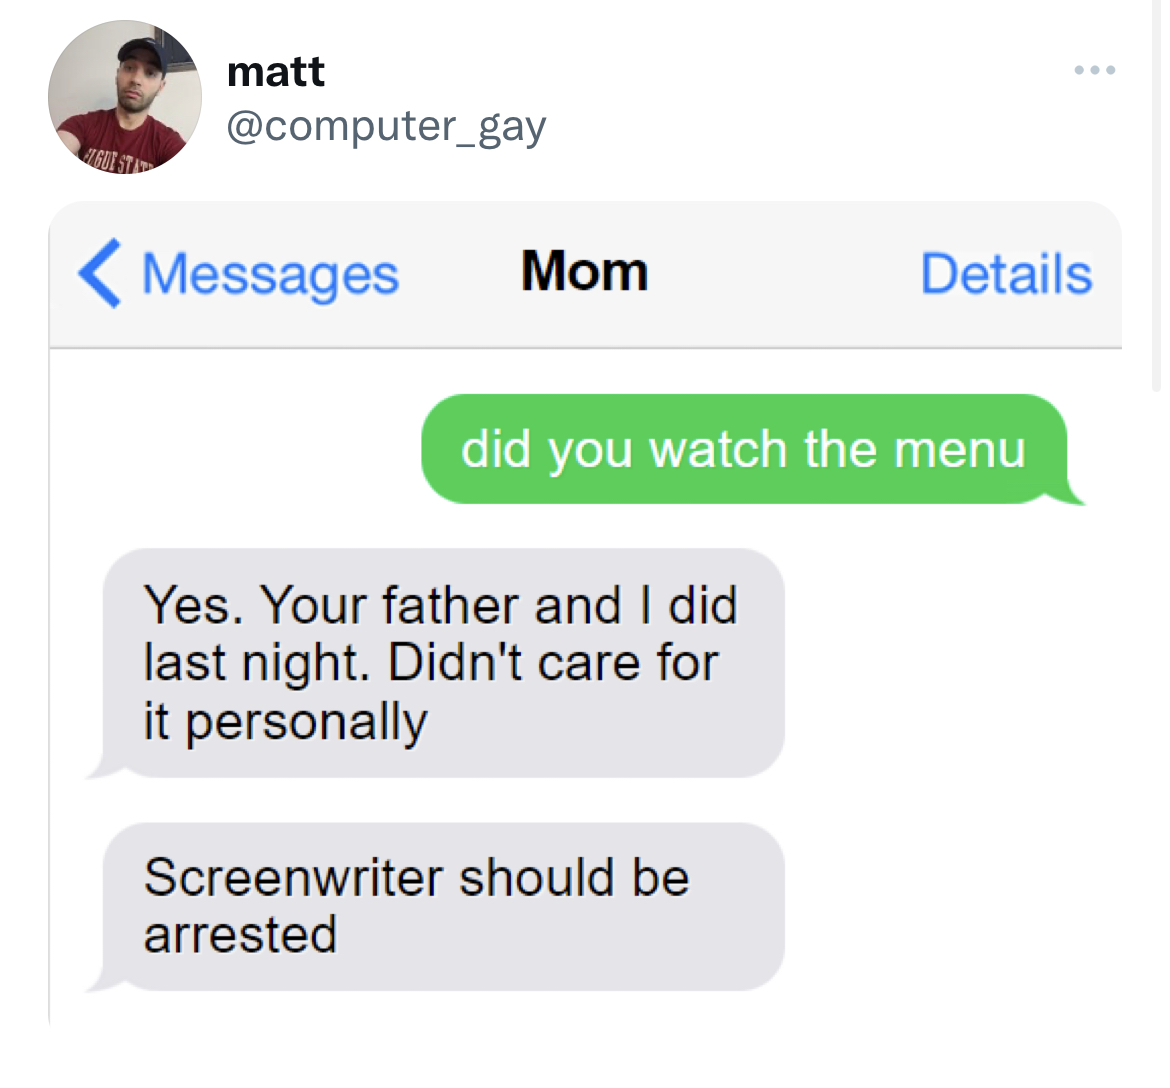 tweets dunking on celebs - web page - Figue Stat matt Messages Mom did you watch the menu Yes. Your father and I did last night. Didn't care for it personally Details Screenwriter should be arrested